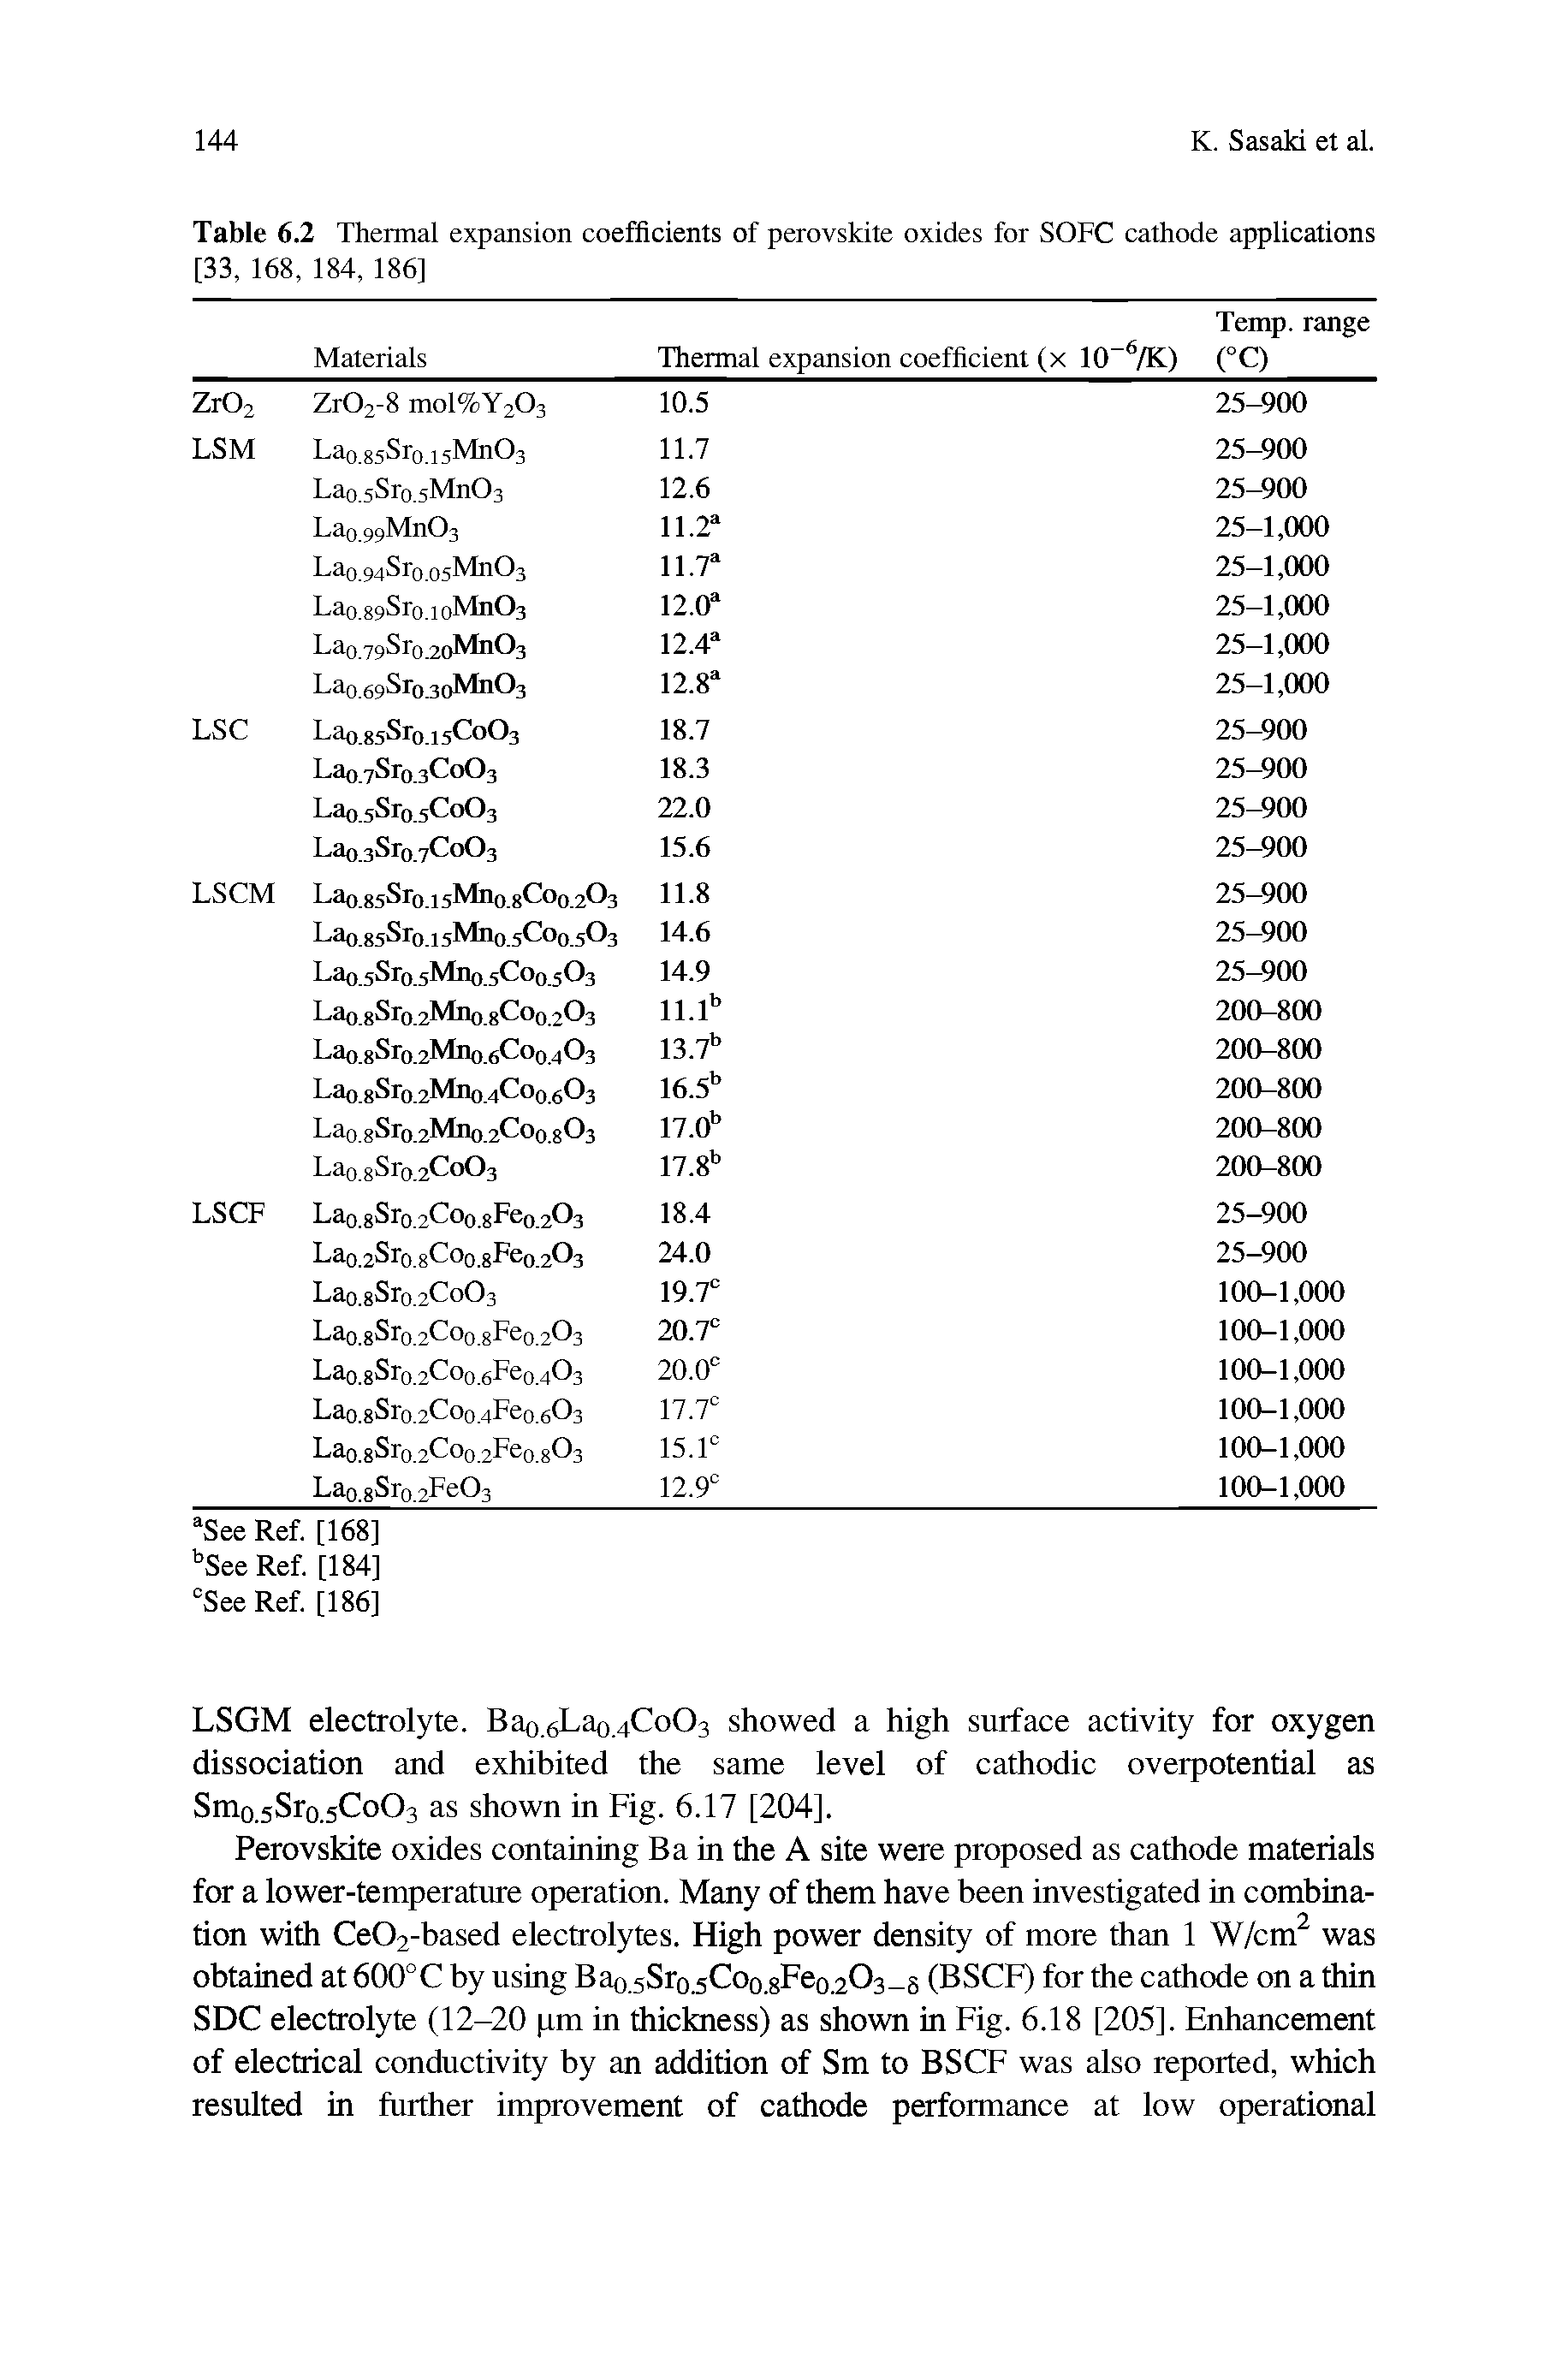 Table 6.2 Thennal expansion coefficients of perovskite oxides for SOFC cathode applications [33, 168, 184, 186]...